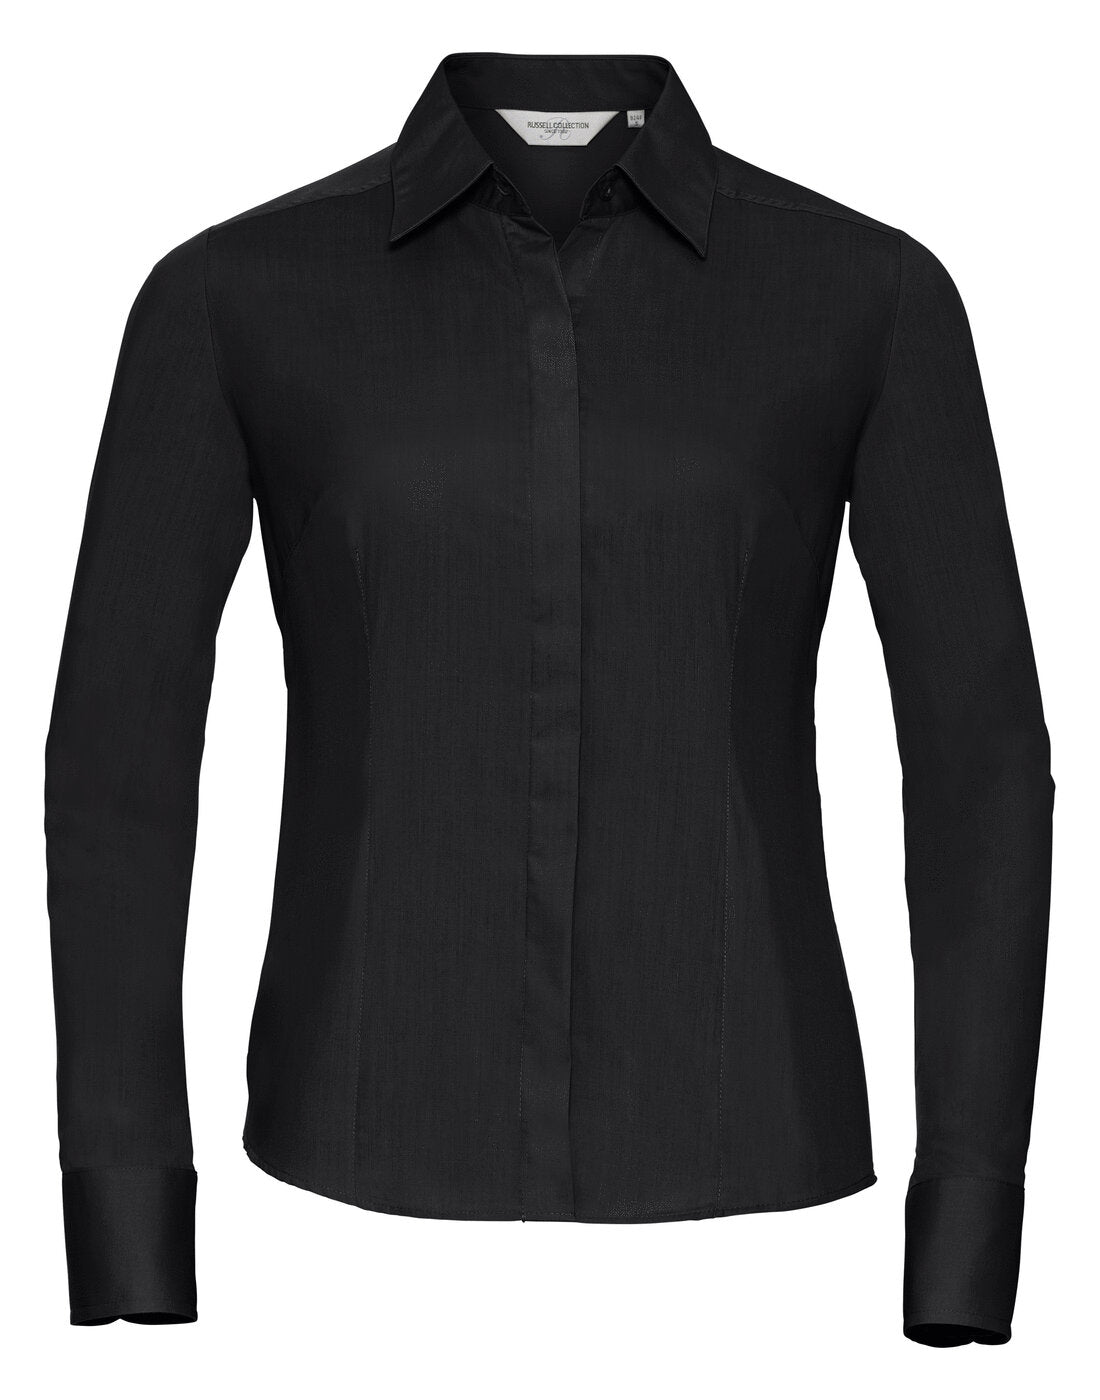 Russell Ladies Long Sleeve Fitted Polycotton Poplin Shirt Black